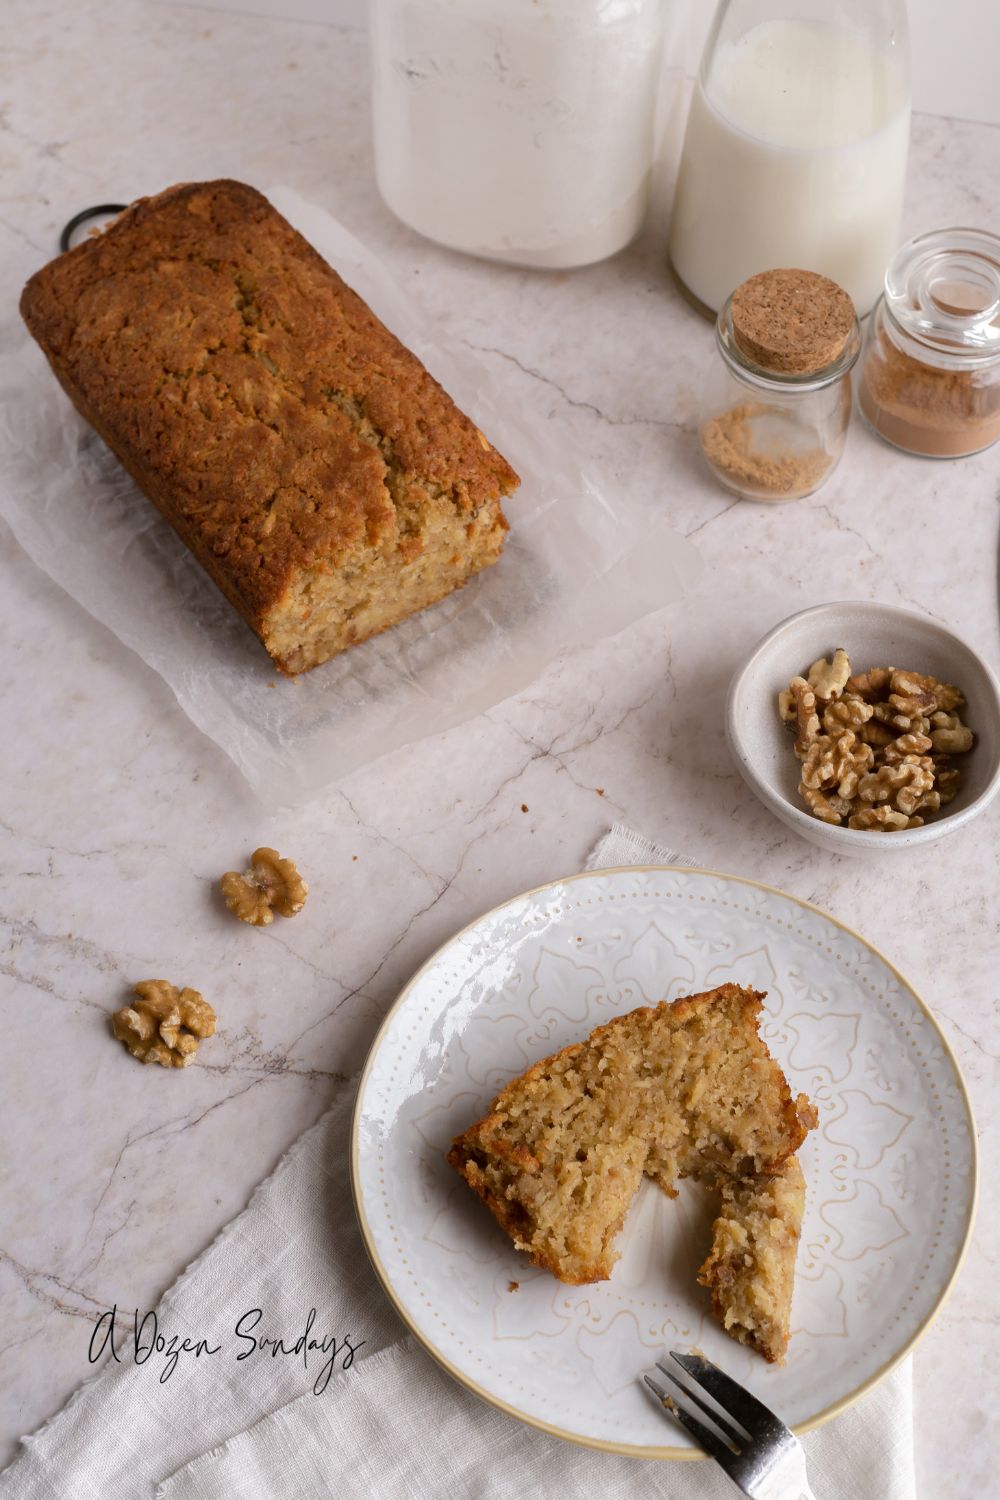 Spiced apple and parsnip cake